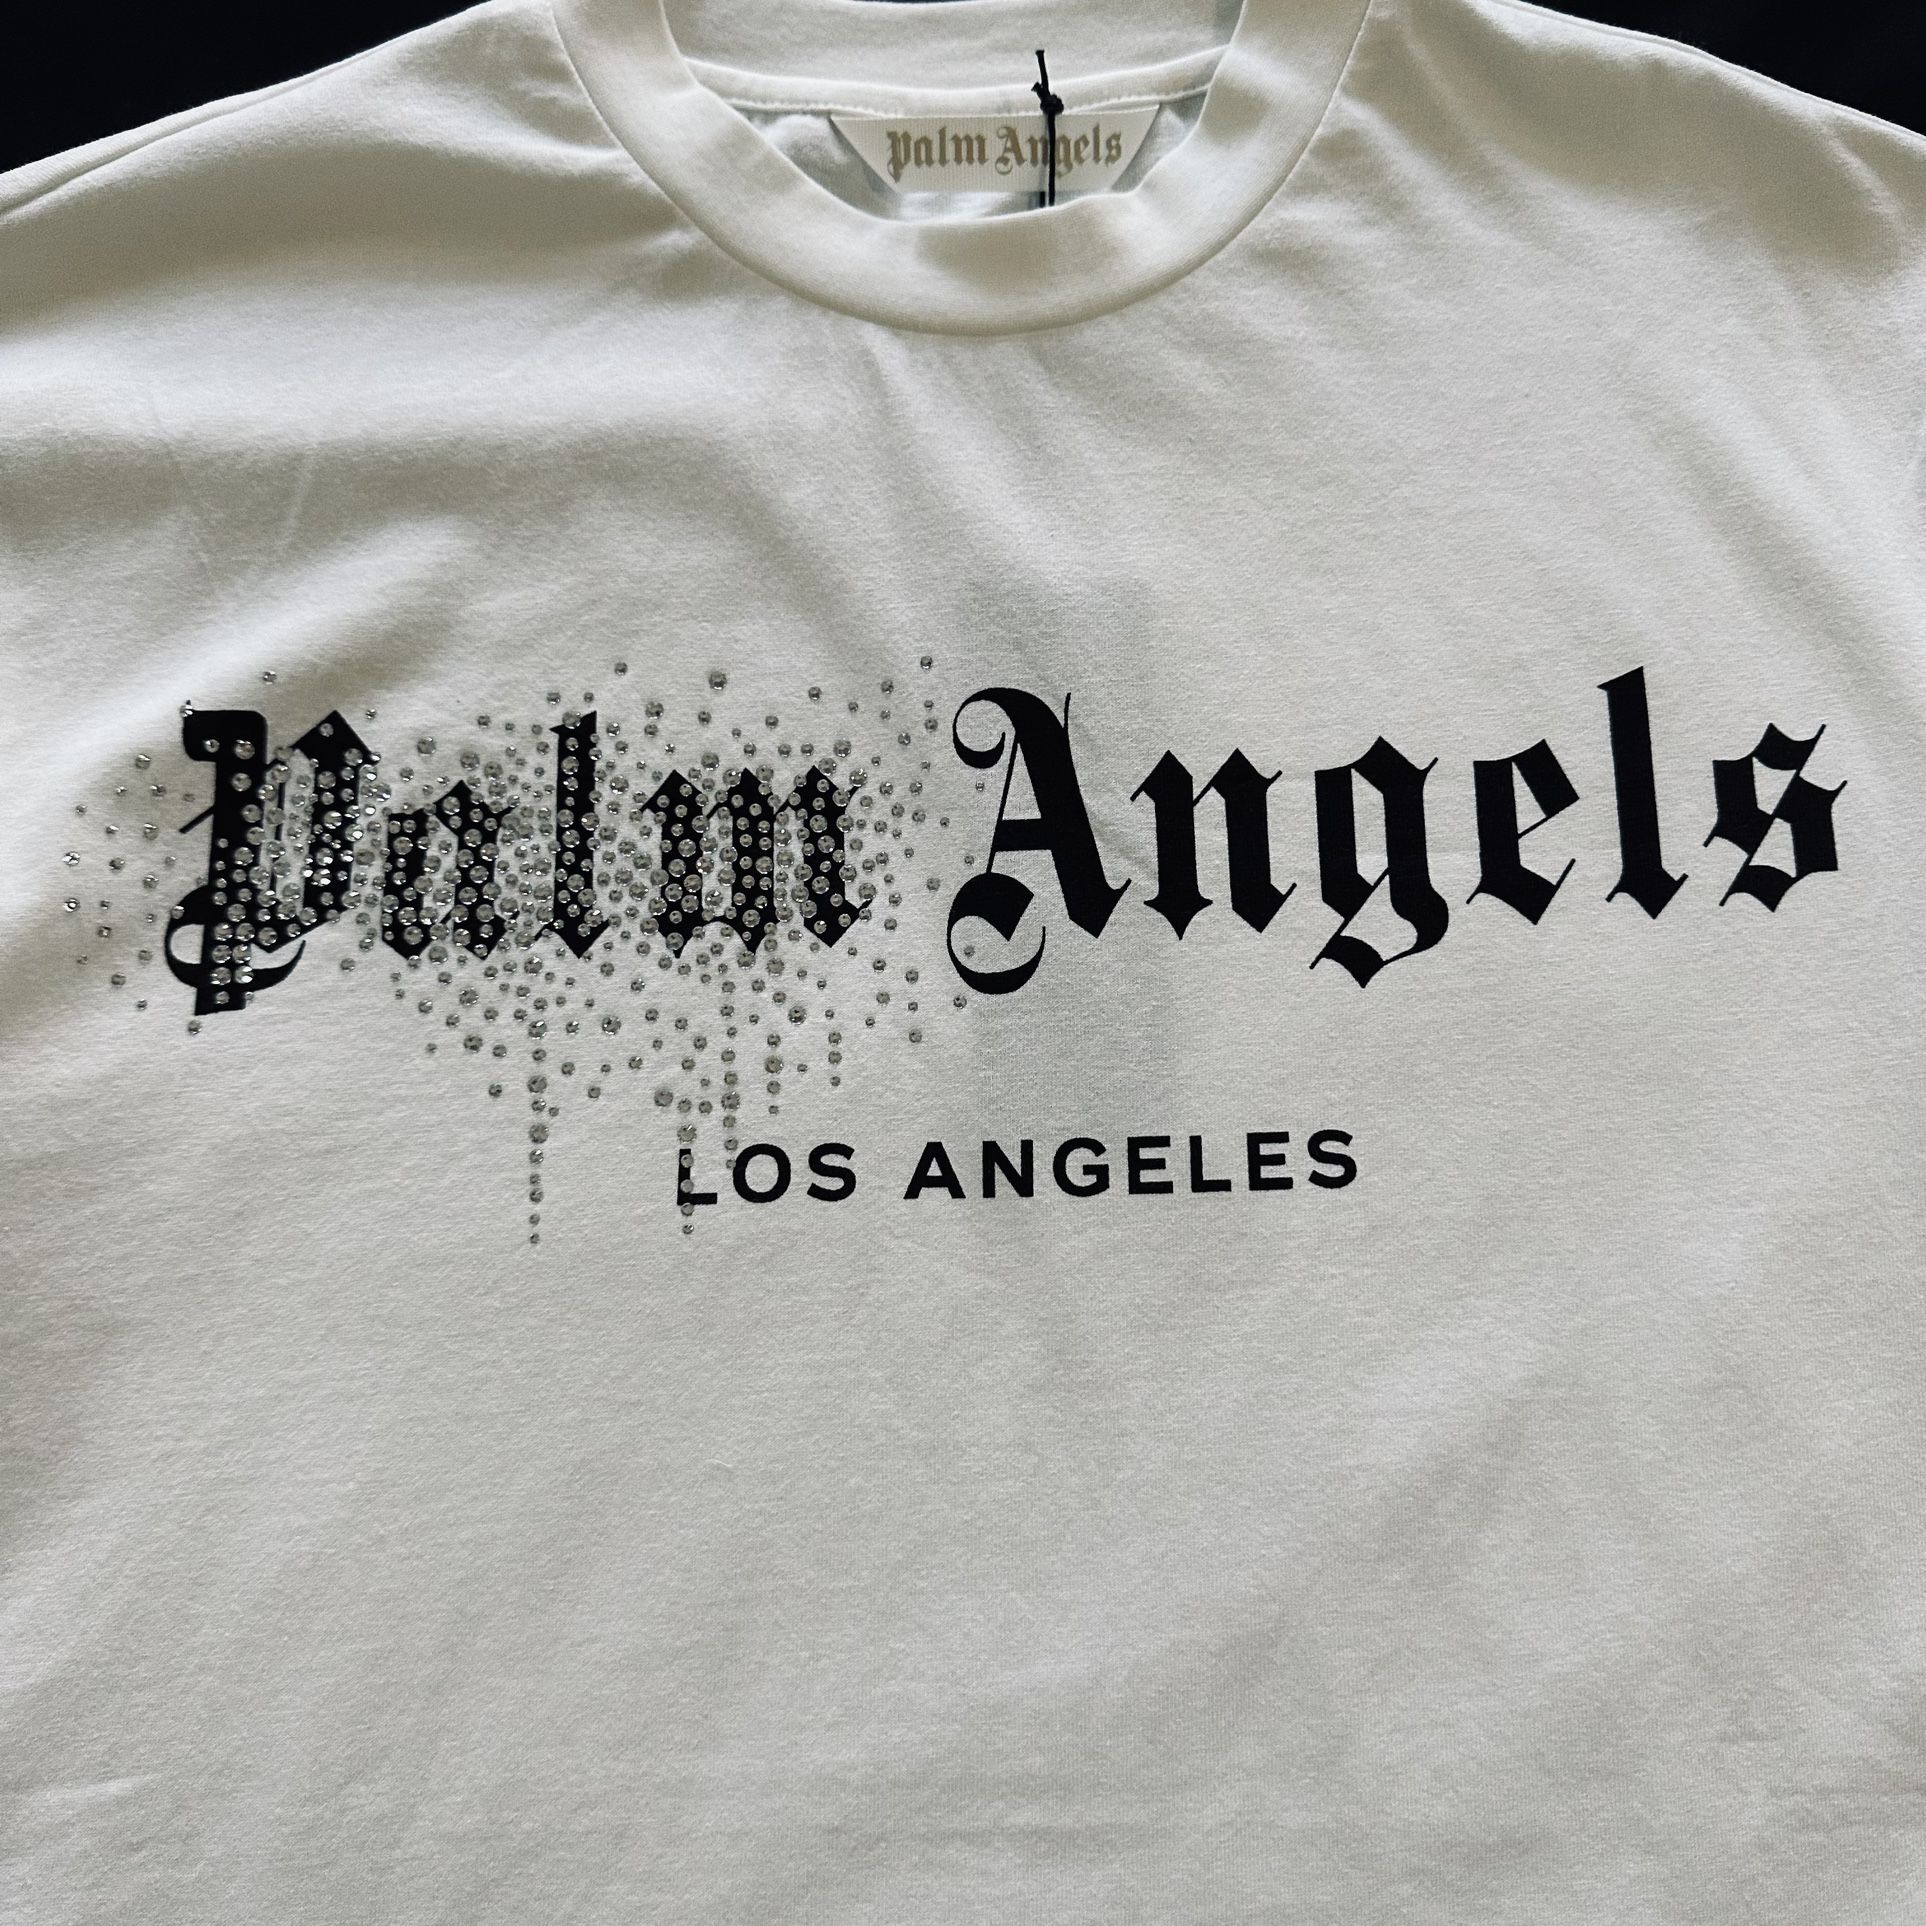 Palm Angels Shirt for Sale in Federal Way, WA - OfferUp